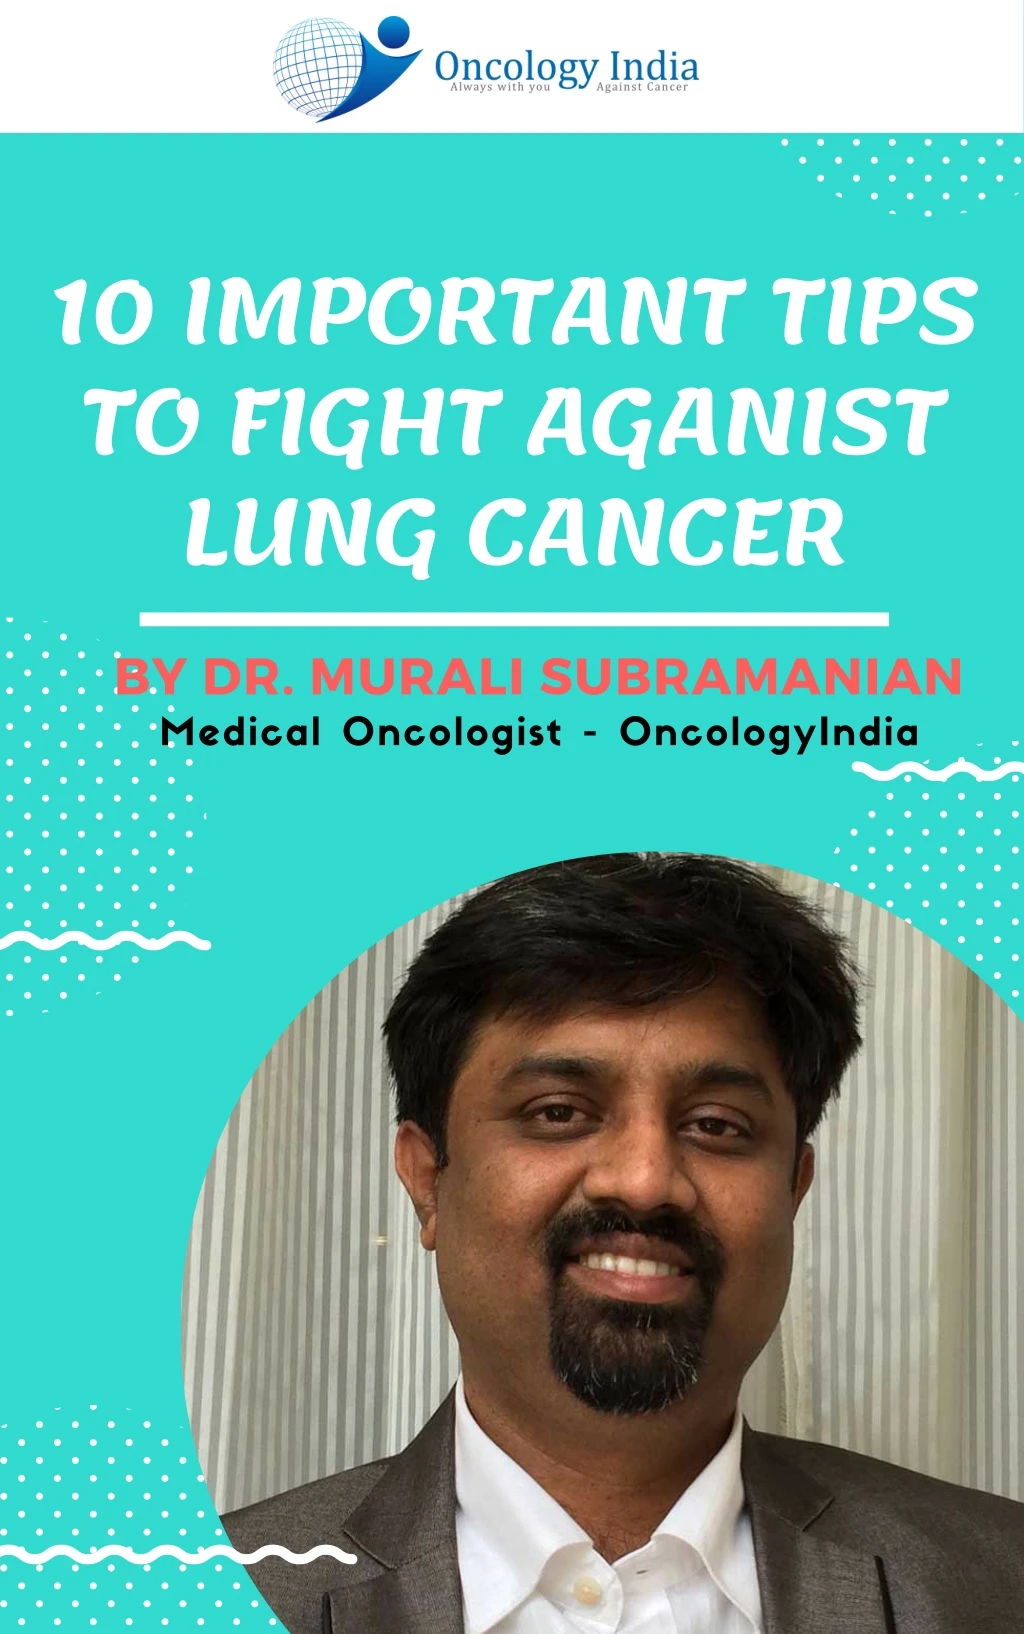 10 important tips to fight aganist lung cancer